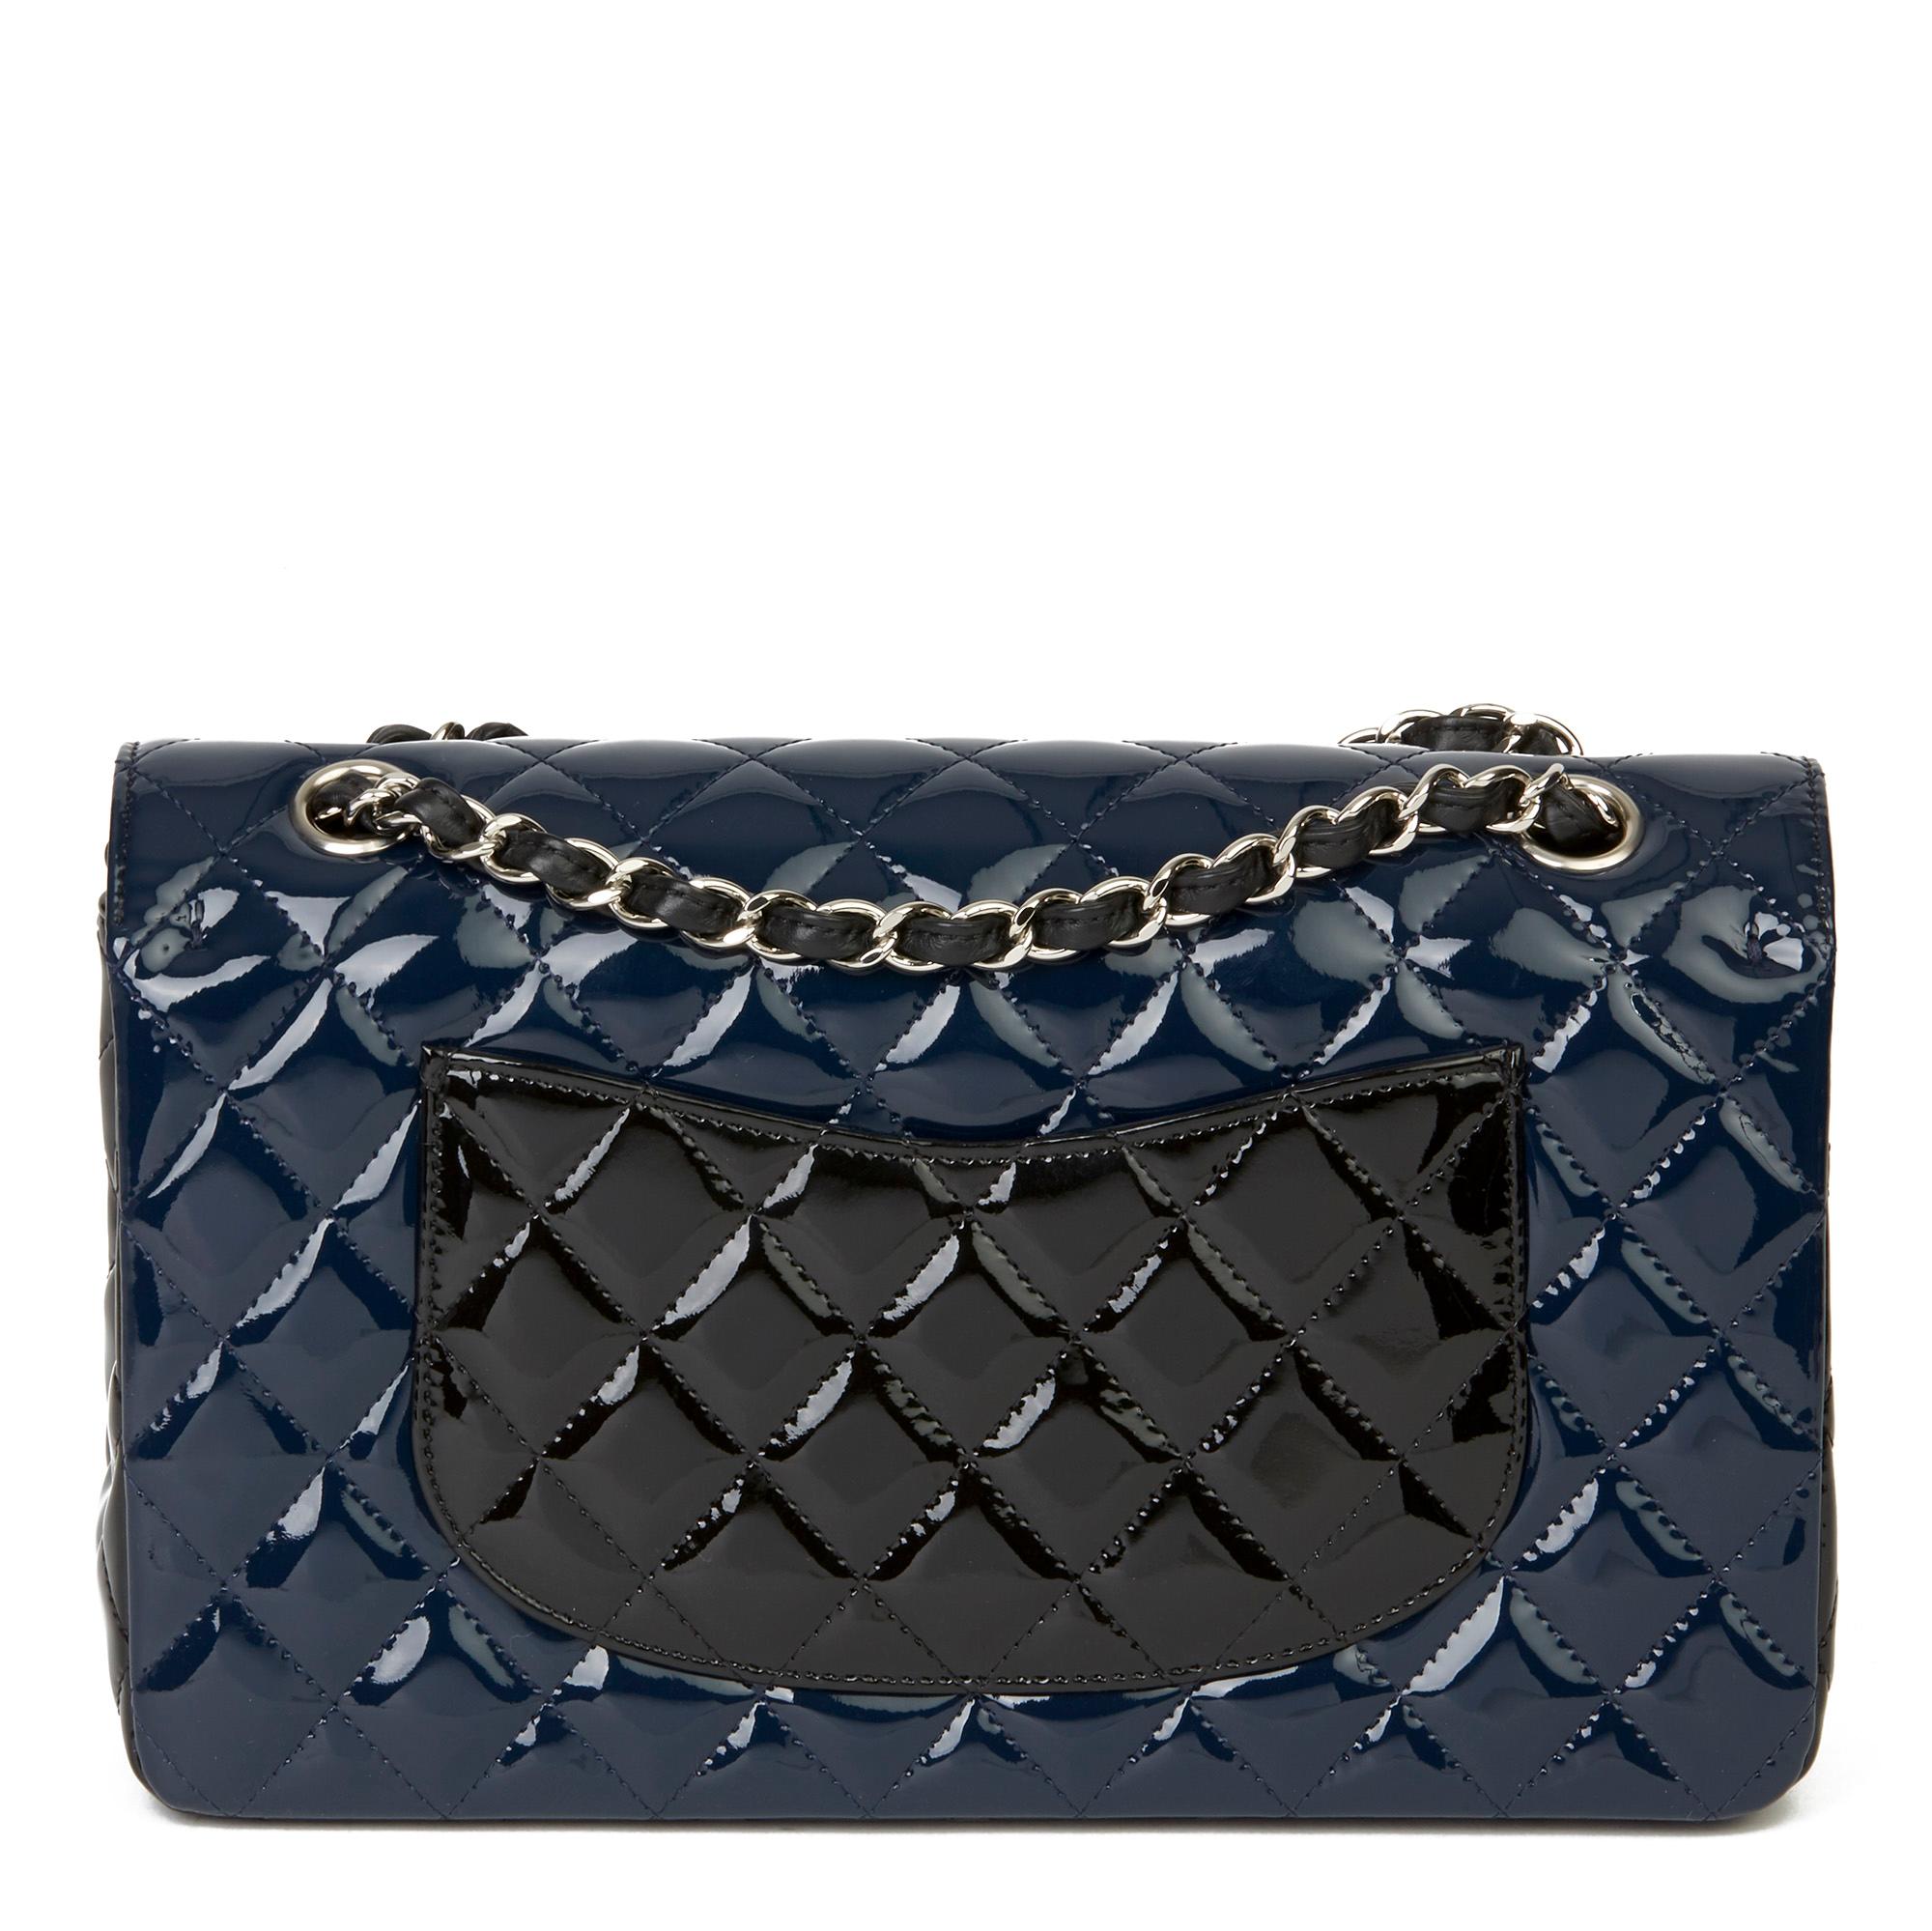 Women's 2020 Chanel Black & Navy Quilted Patent Leather Medium Classic Double Flap Bag